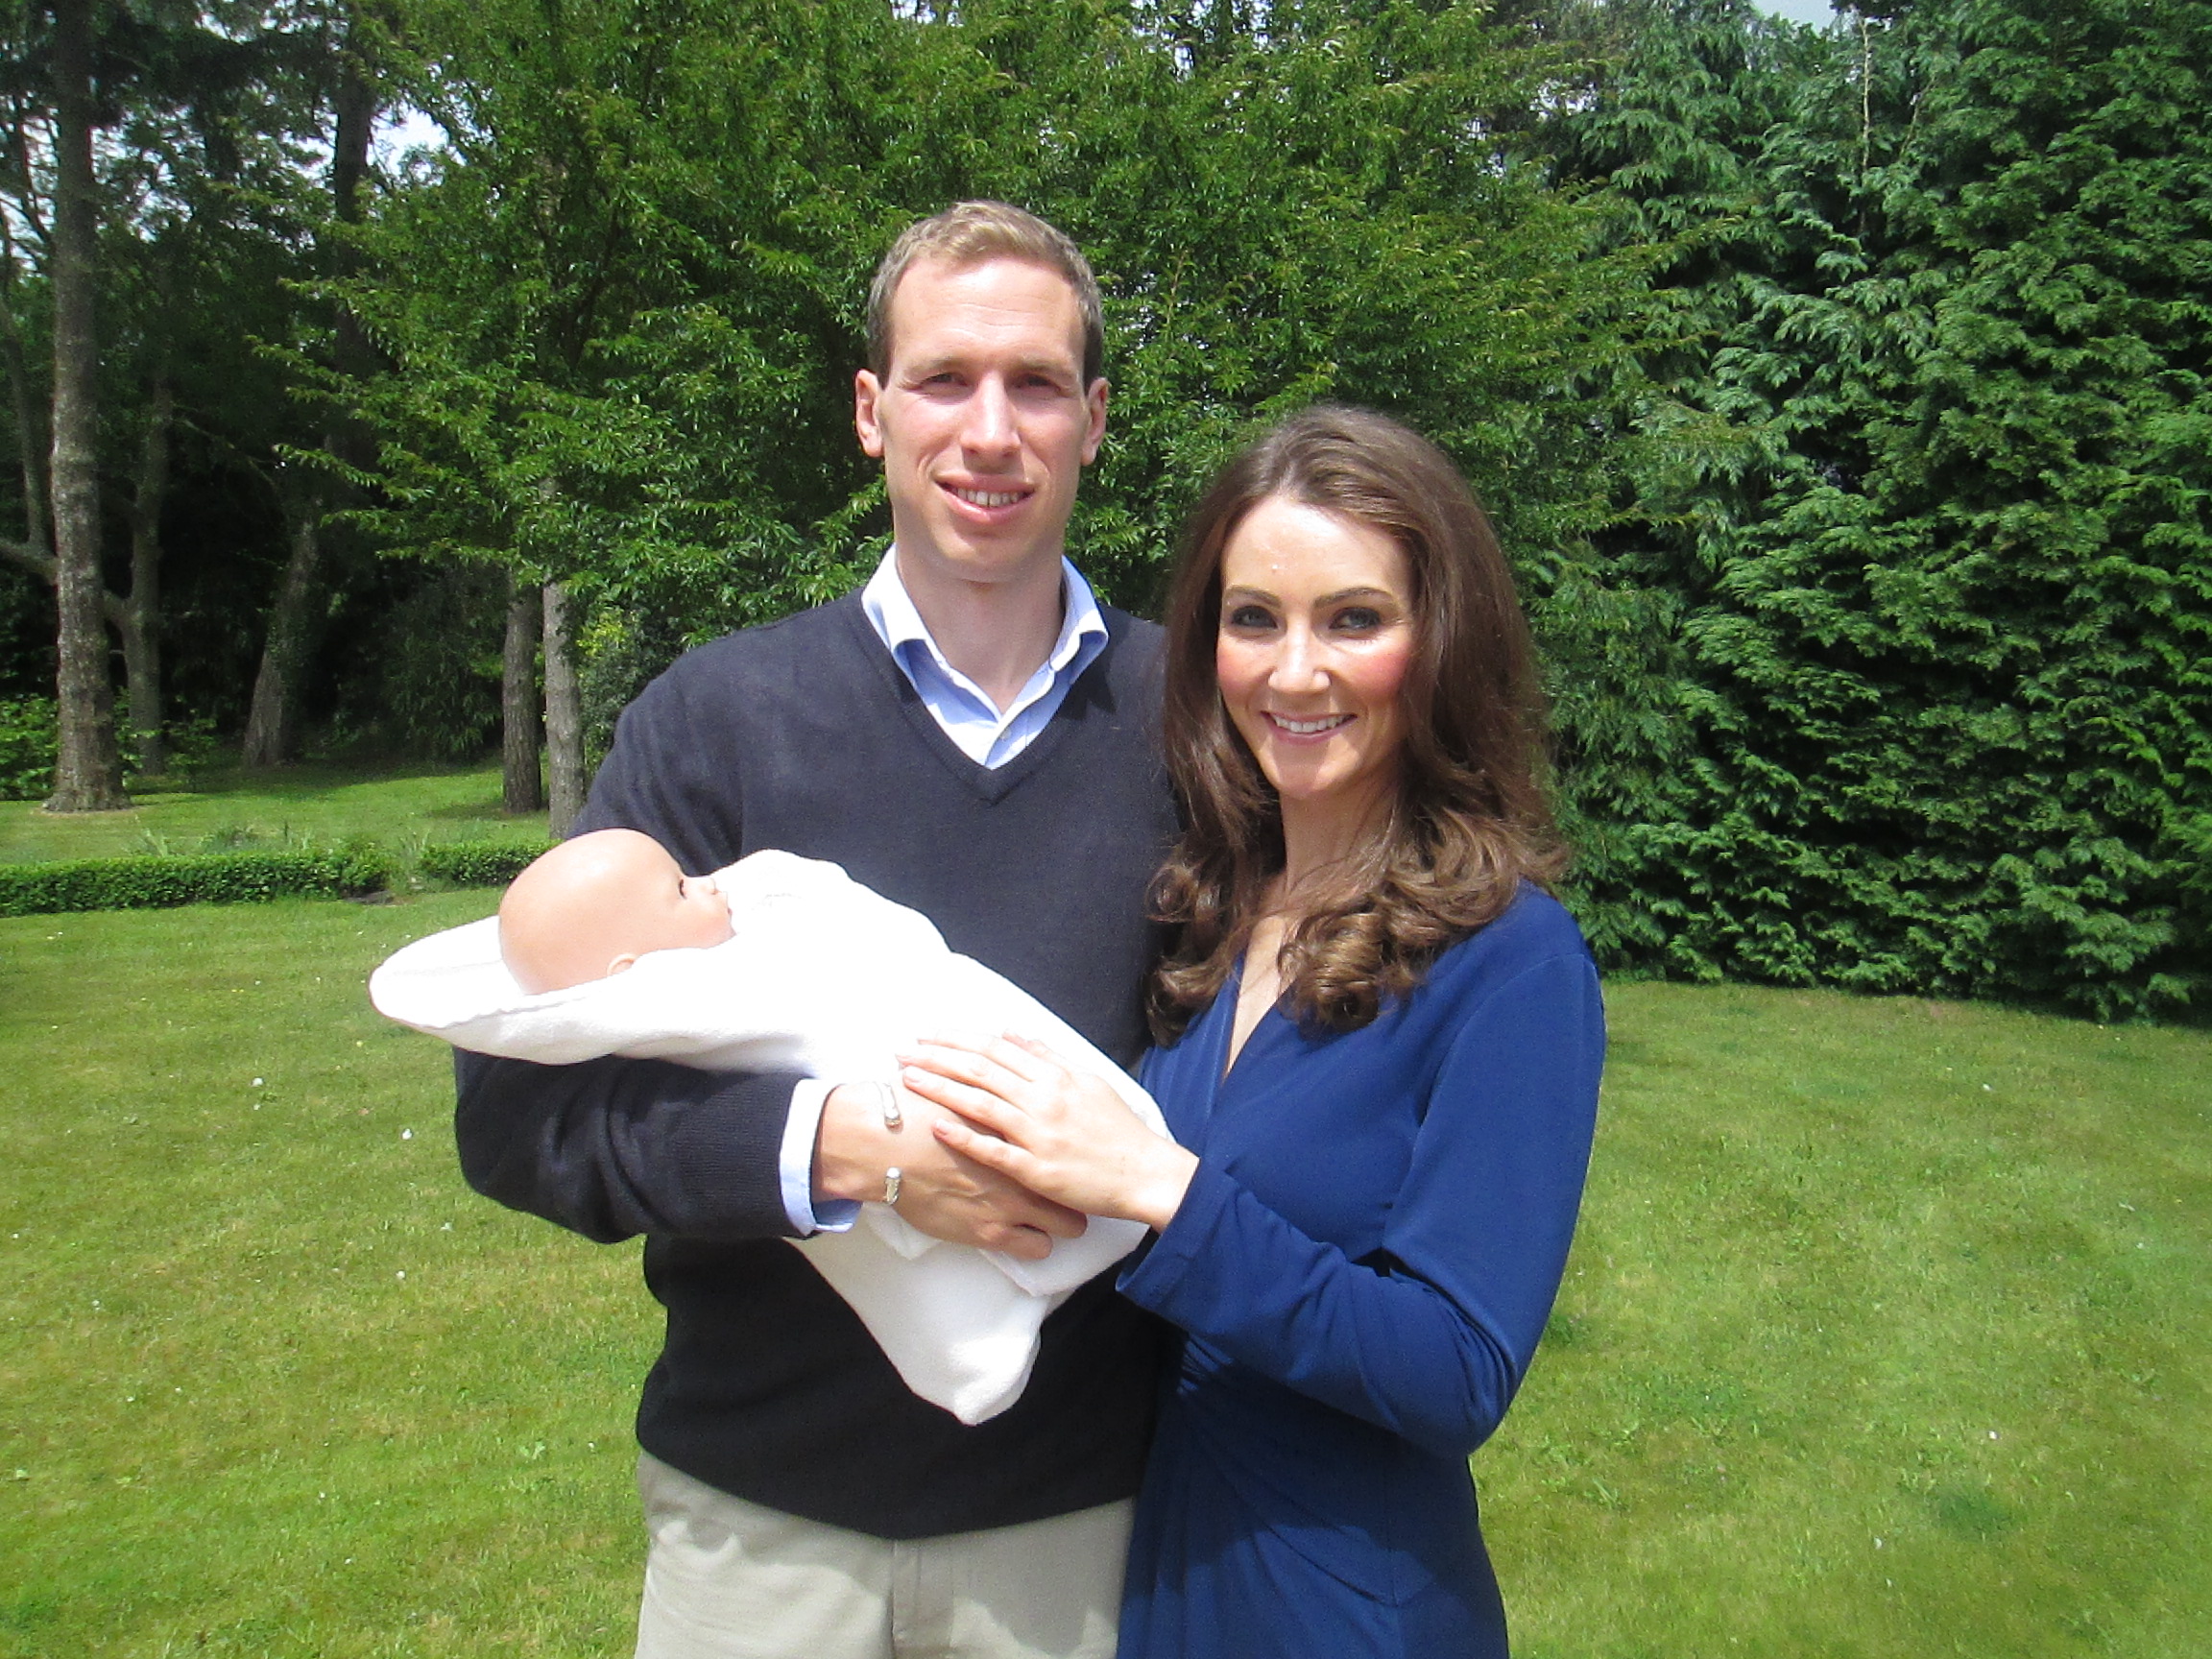 Royal addition: Duchess Kate look-alike adds baby doll as 